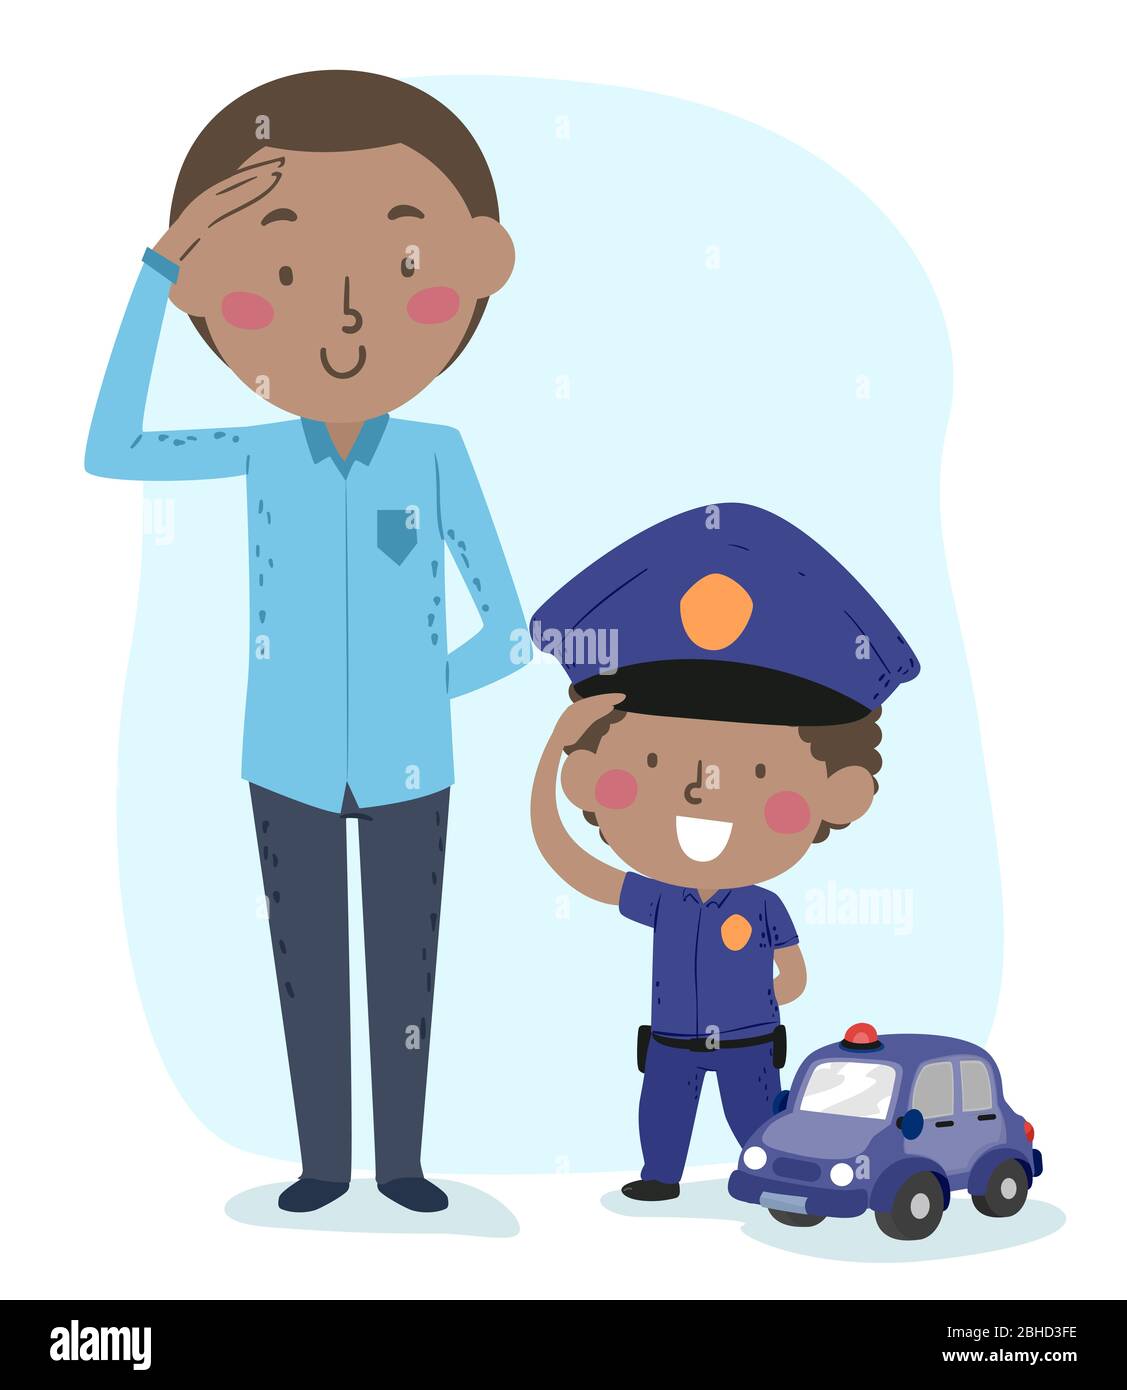 Illustration of a Kid Boy Wearing Police Uniform and His Father with their Hands Raised in Salute. A Police Toy Car is Beside the Kid Stock Photo